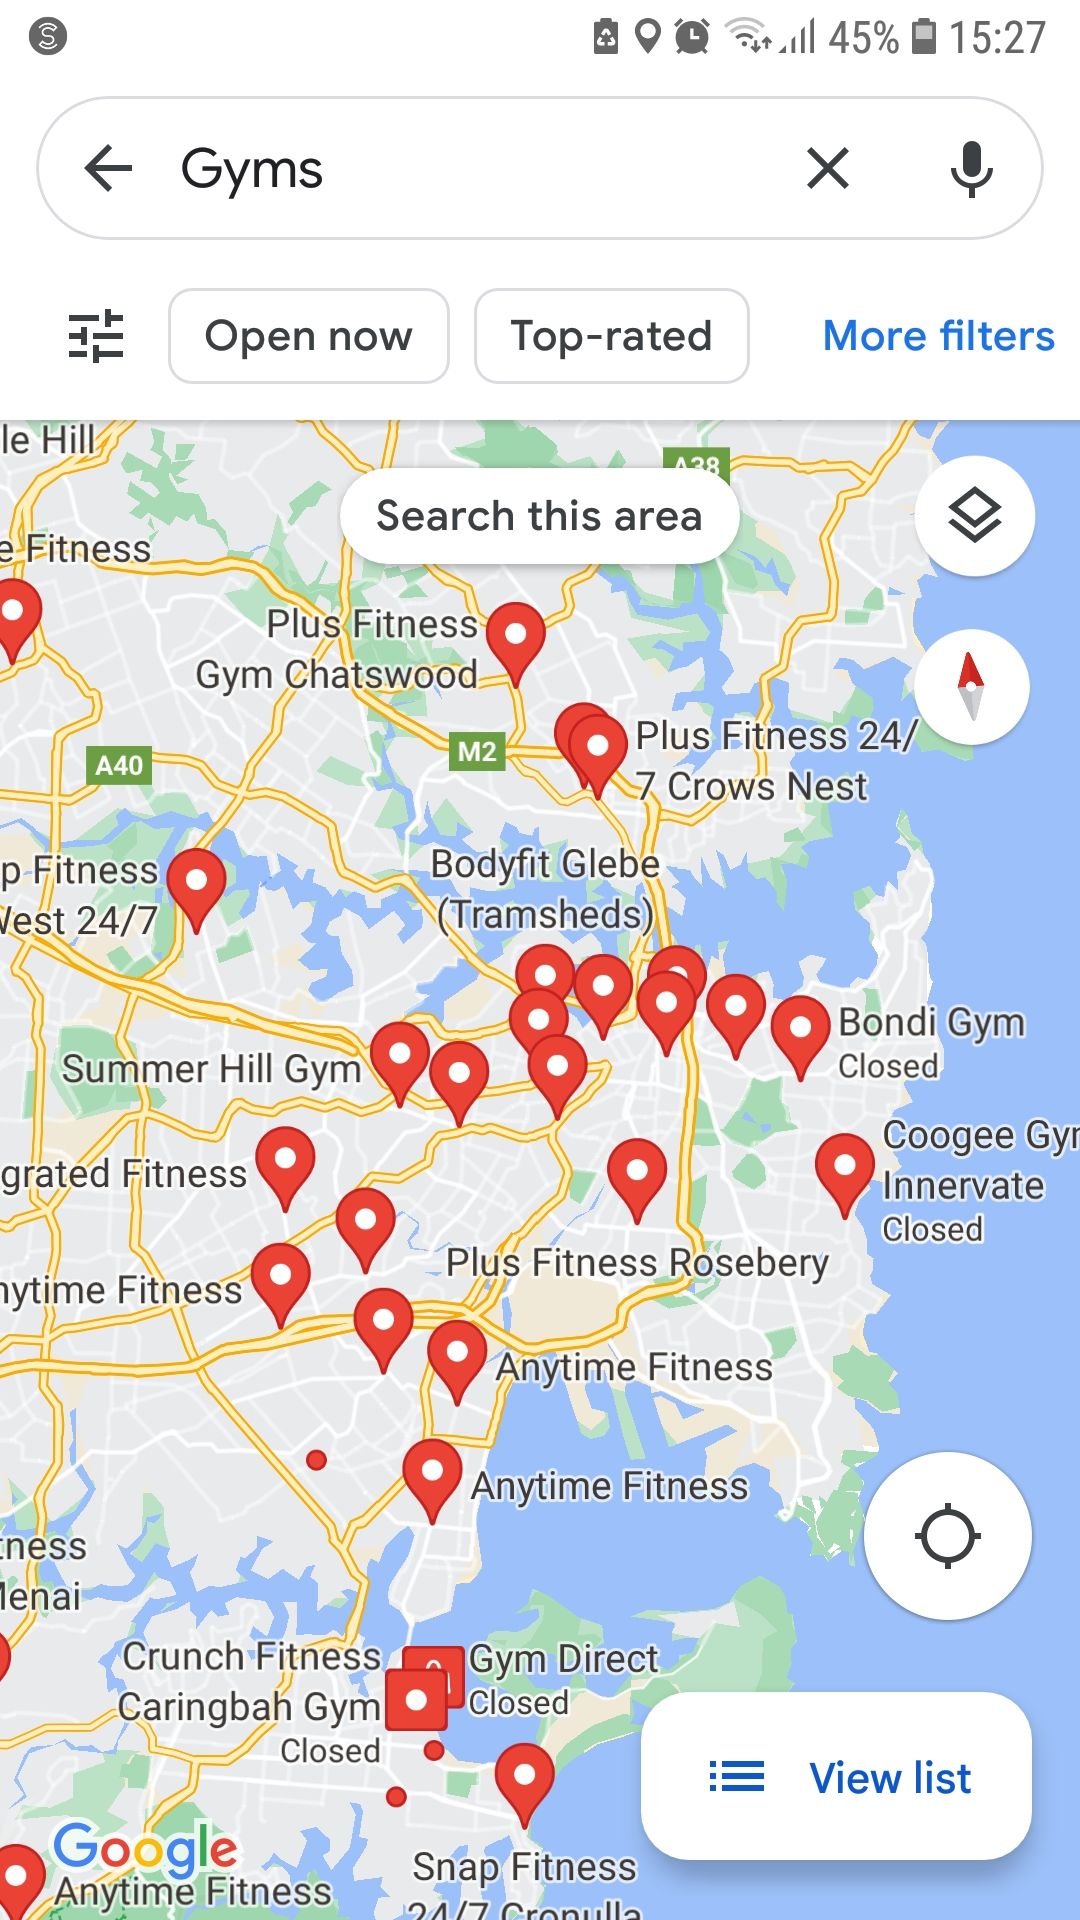 Google Maps web mapping mobile app gyms